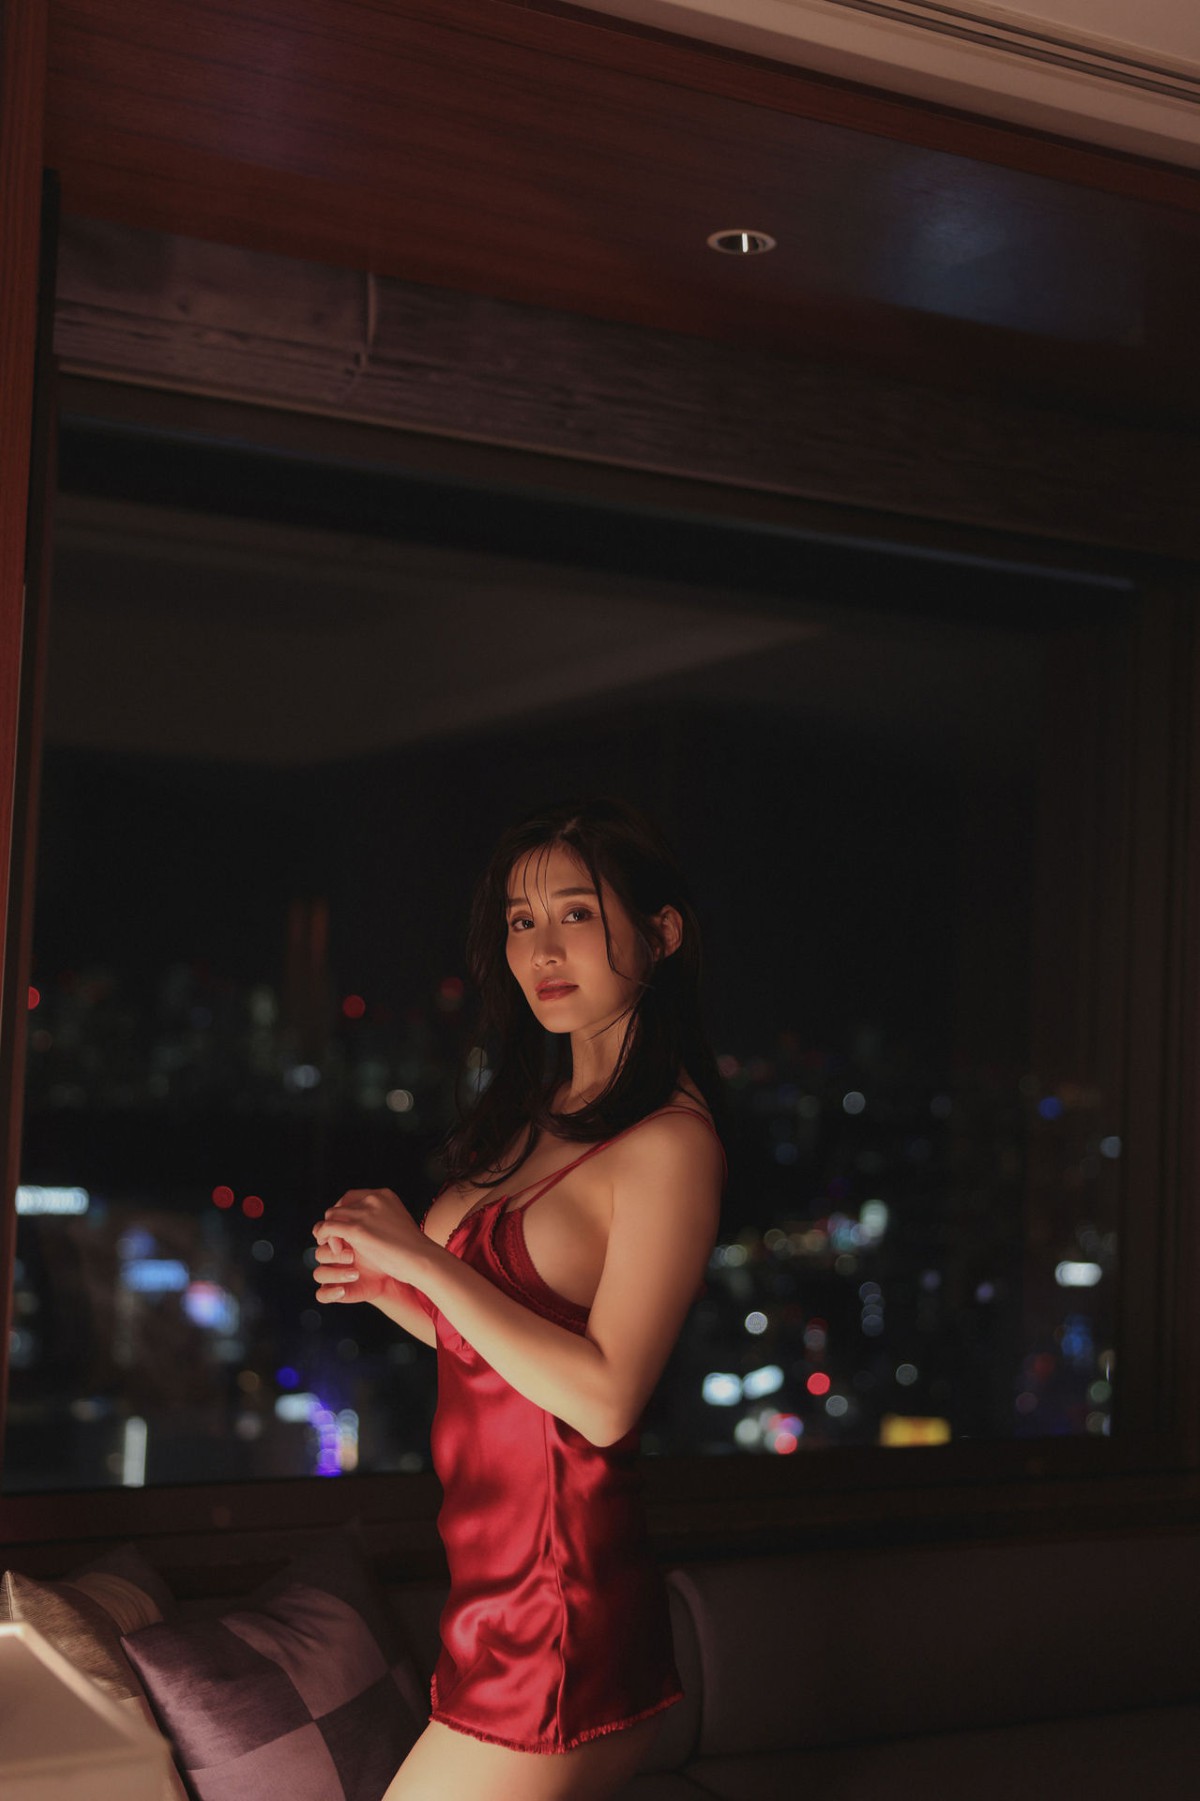 FRIDAY Digital Photobook 2023 02 10 Rin Takahashi 高橋凛 In A Suite Room With An I Cup Beauty Vol 1 0038 5415642653.jpg